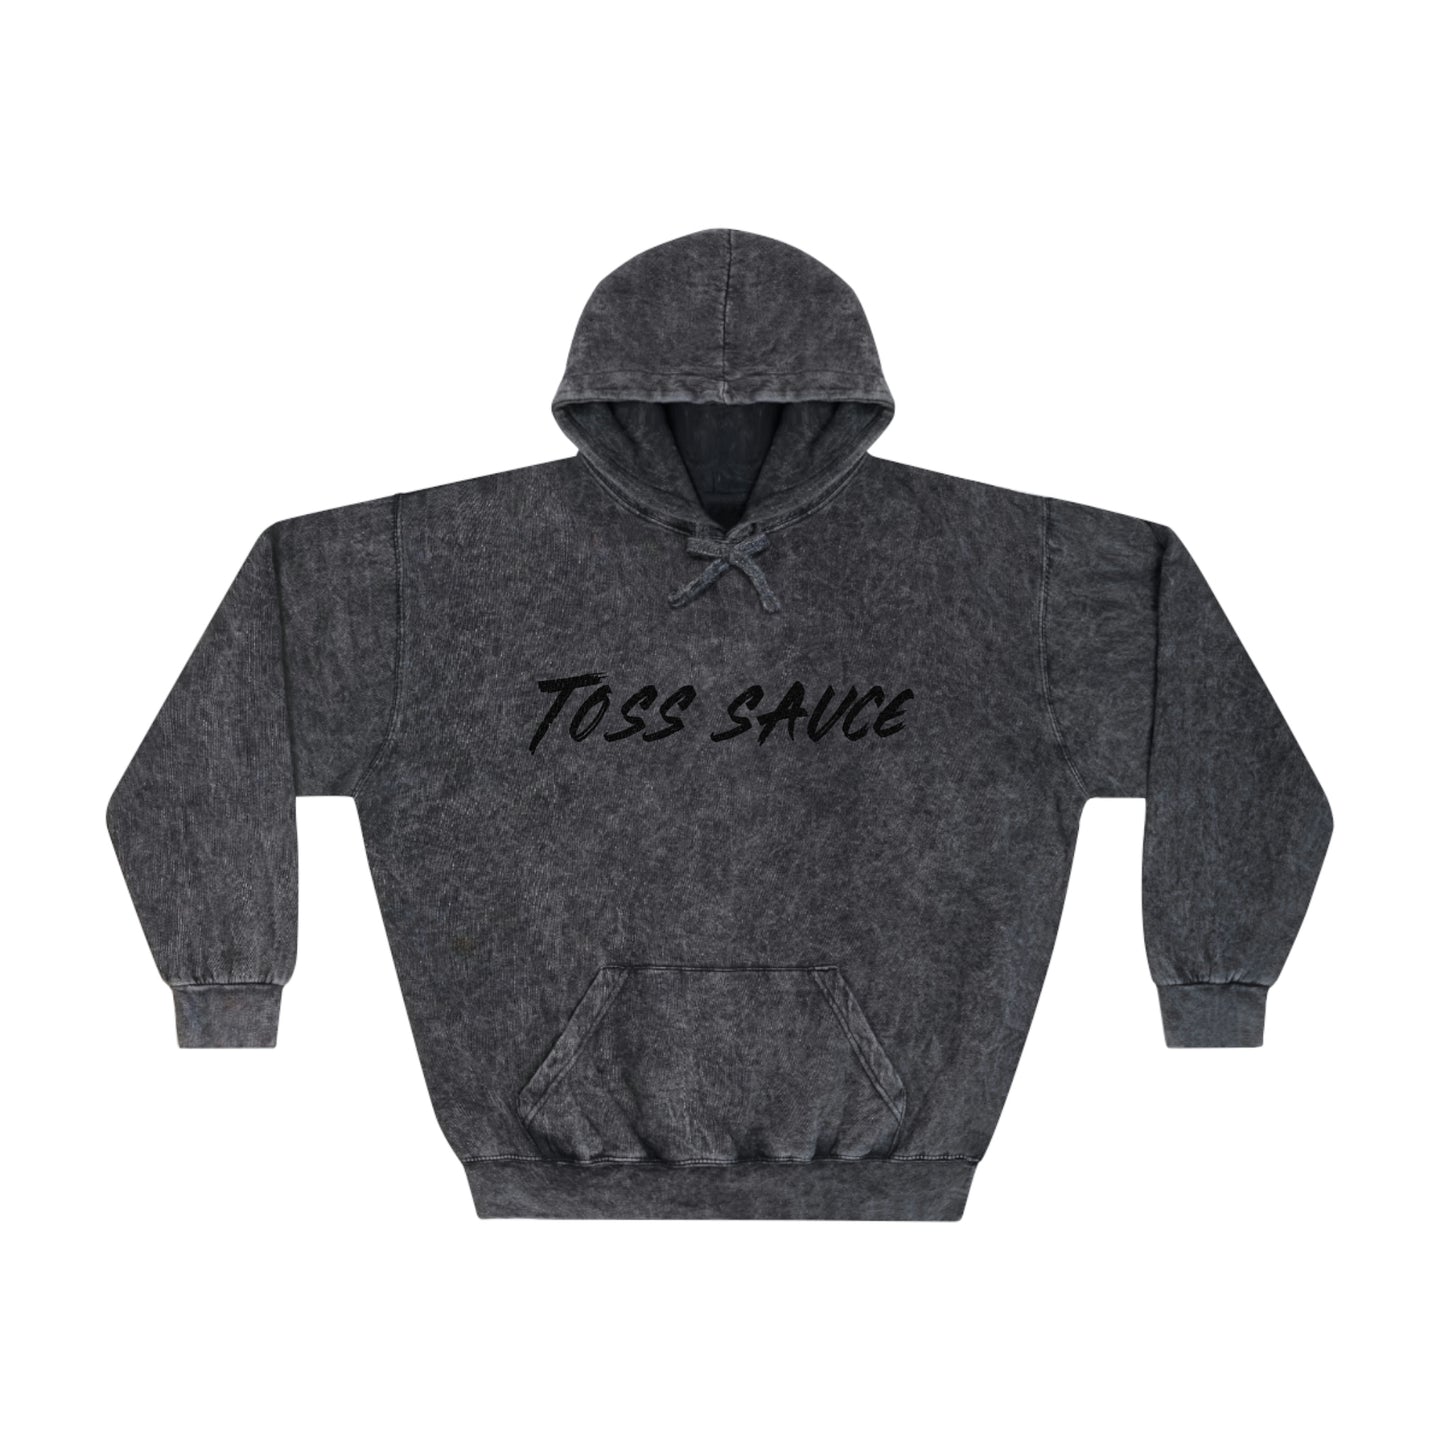 Toss Sauce (front and back design) Unisex Mineral Wash Hoodie